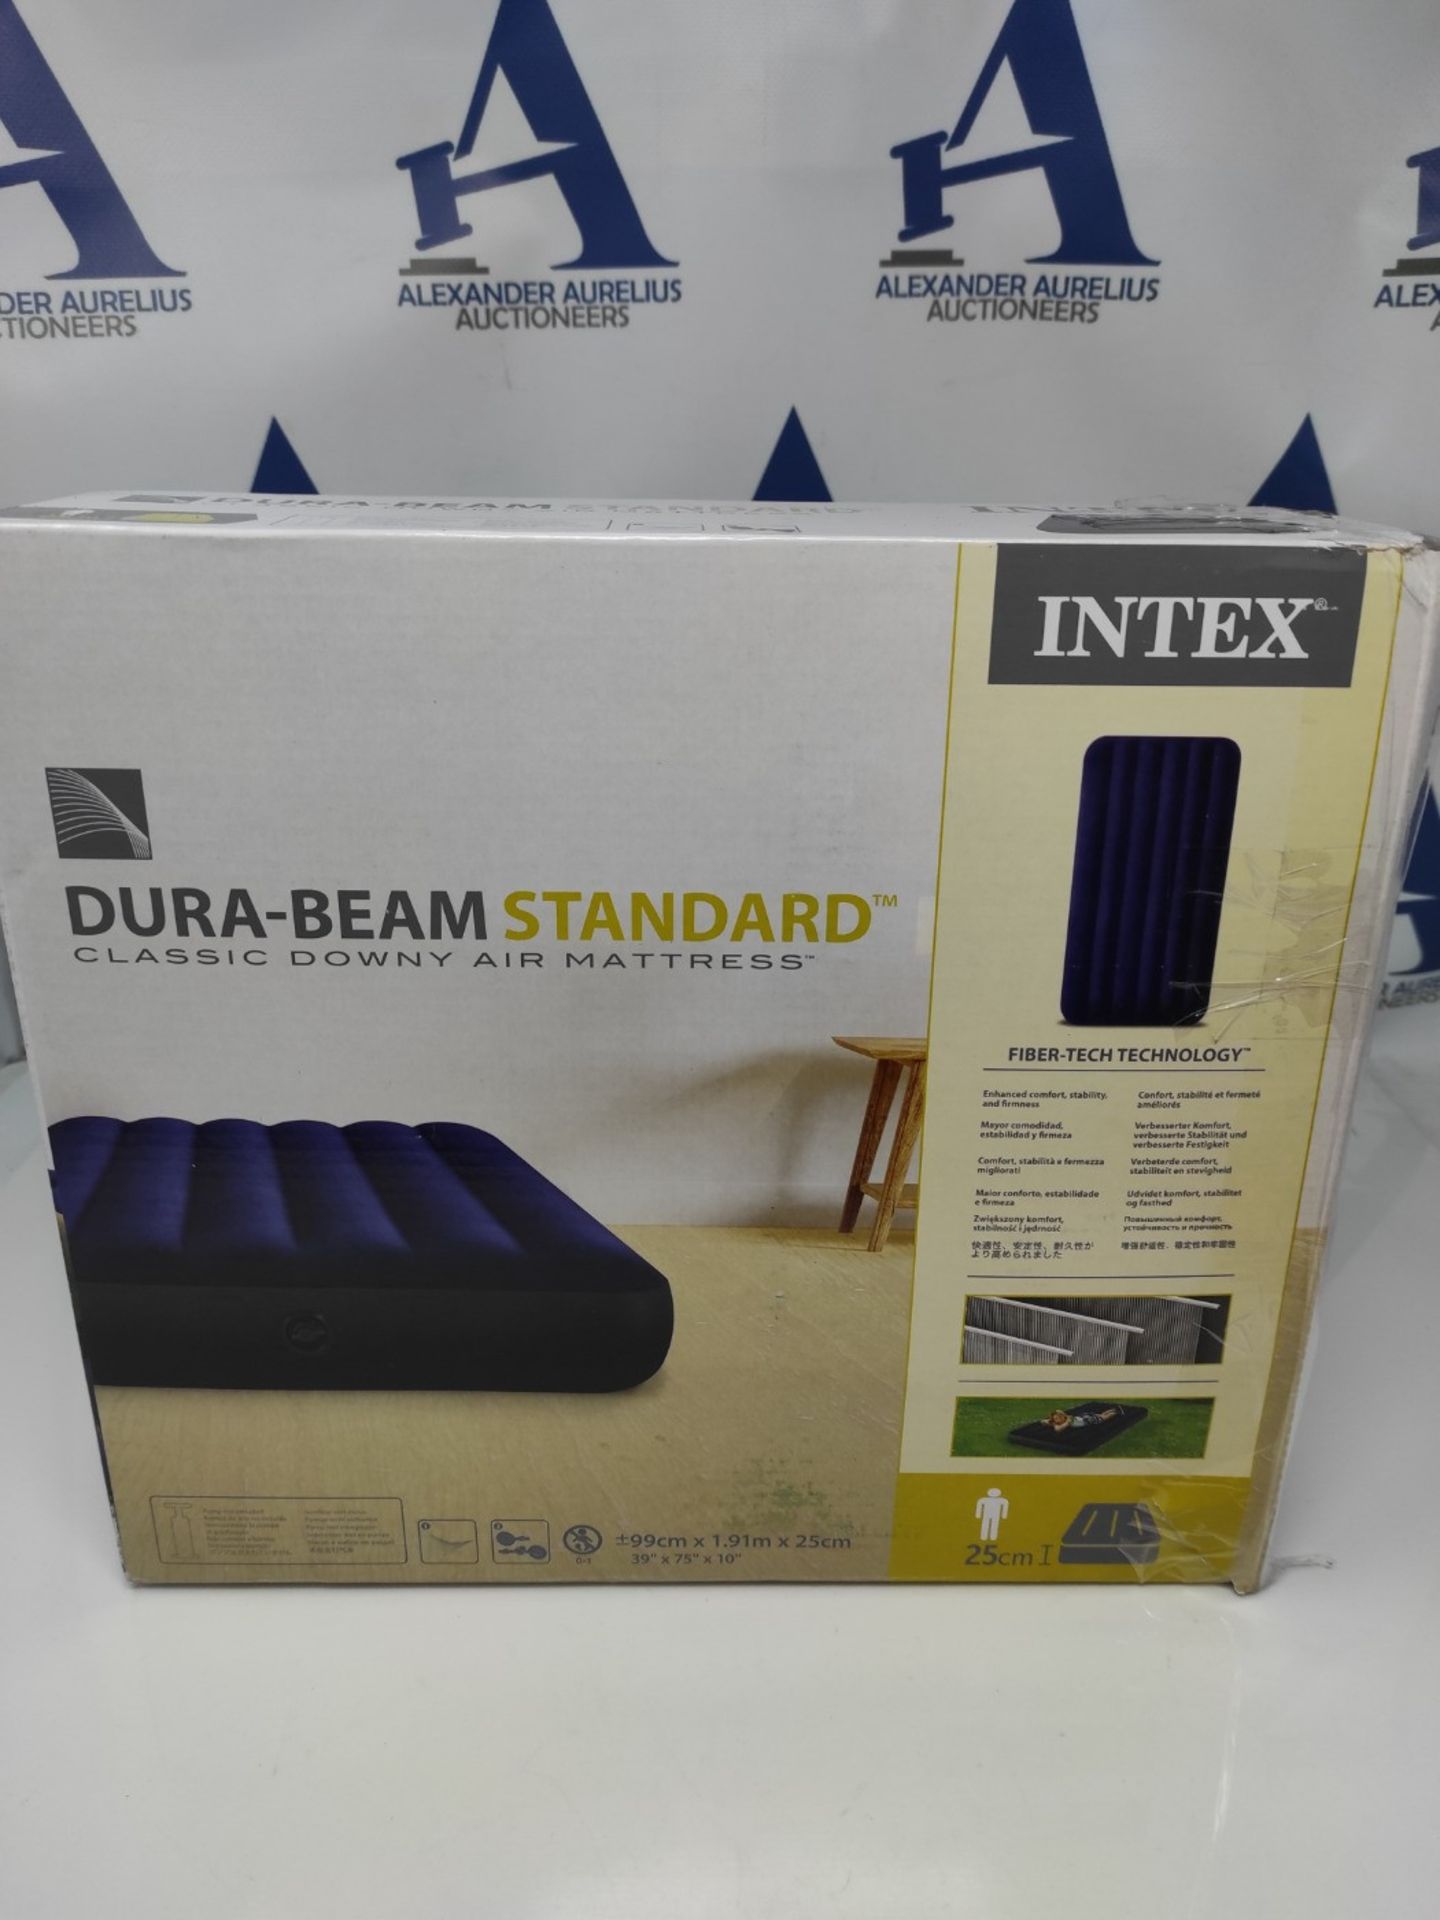 Intex 64757 Classic Downy Blue Dura-Beam Series Twin Airbed, Blue, 191 x 99 x 25 cm (L - Image 2 of 3